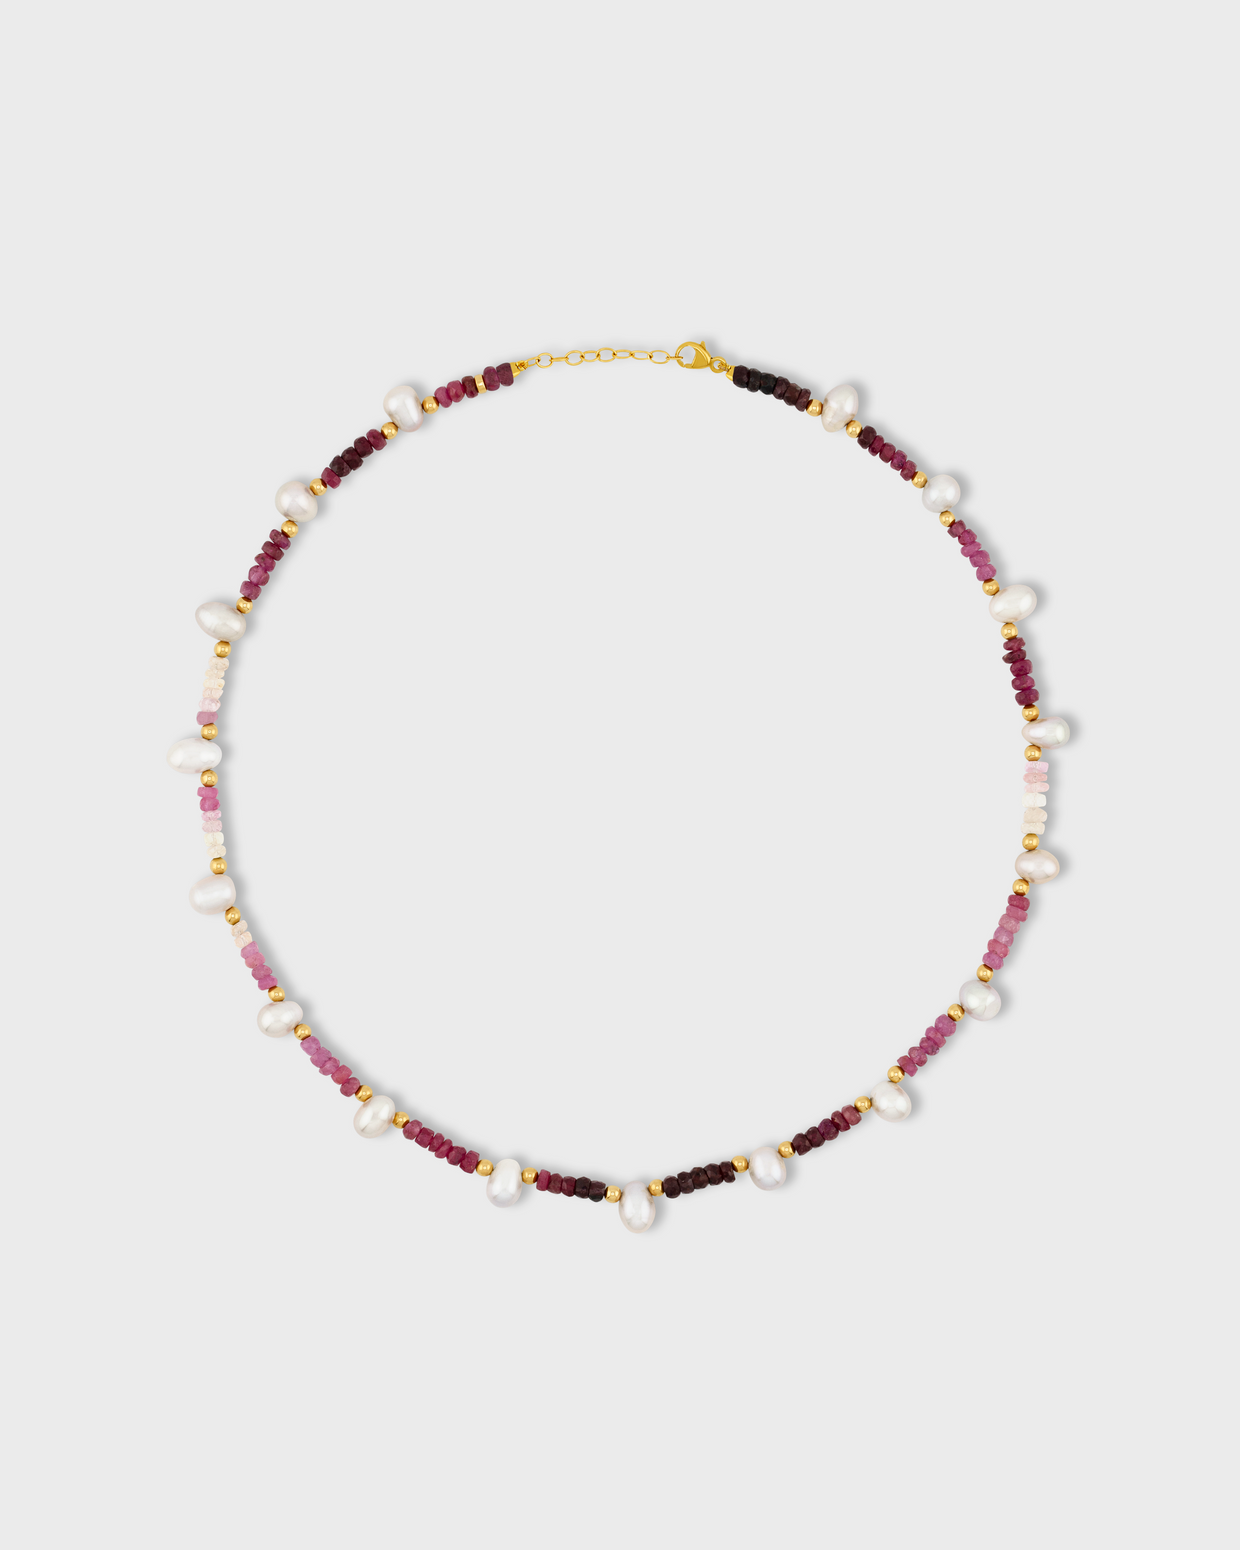 Arizona Ombre Ruby Pearl Gold Bead Necklace